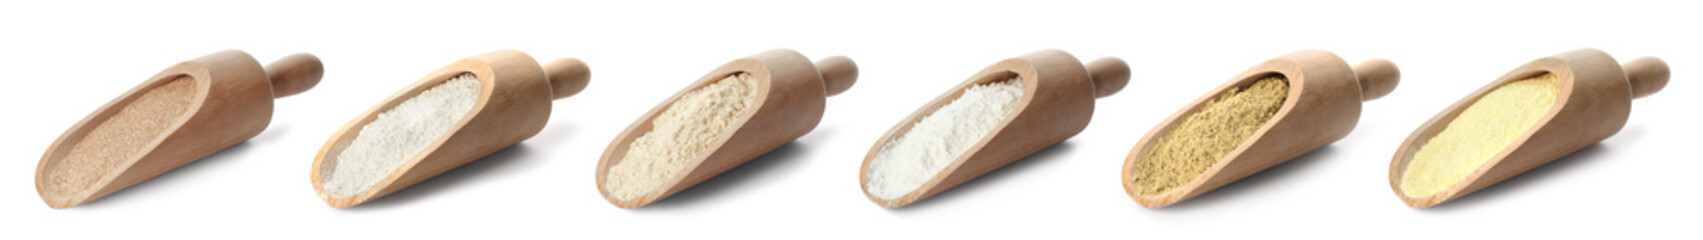 Set of organic flour in wooden scoops on white background